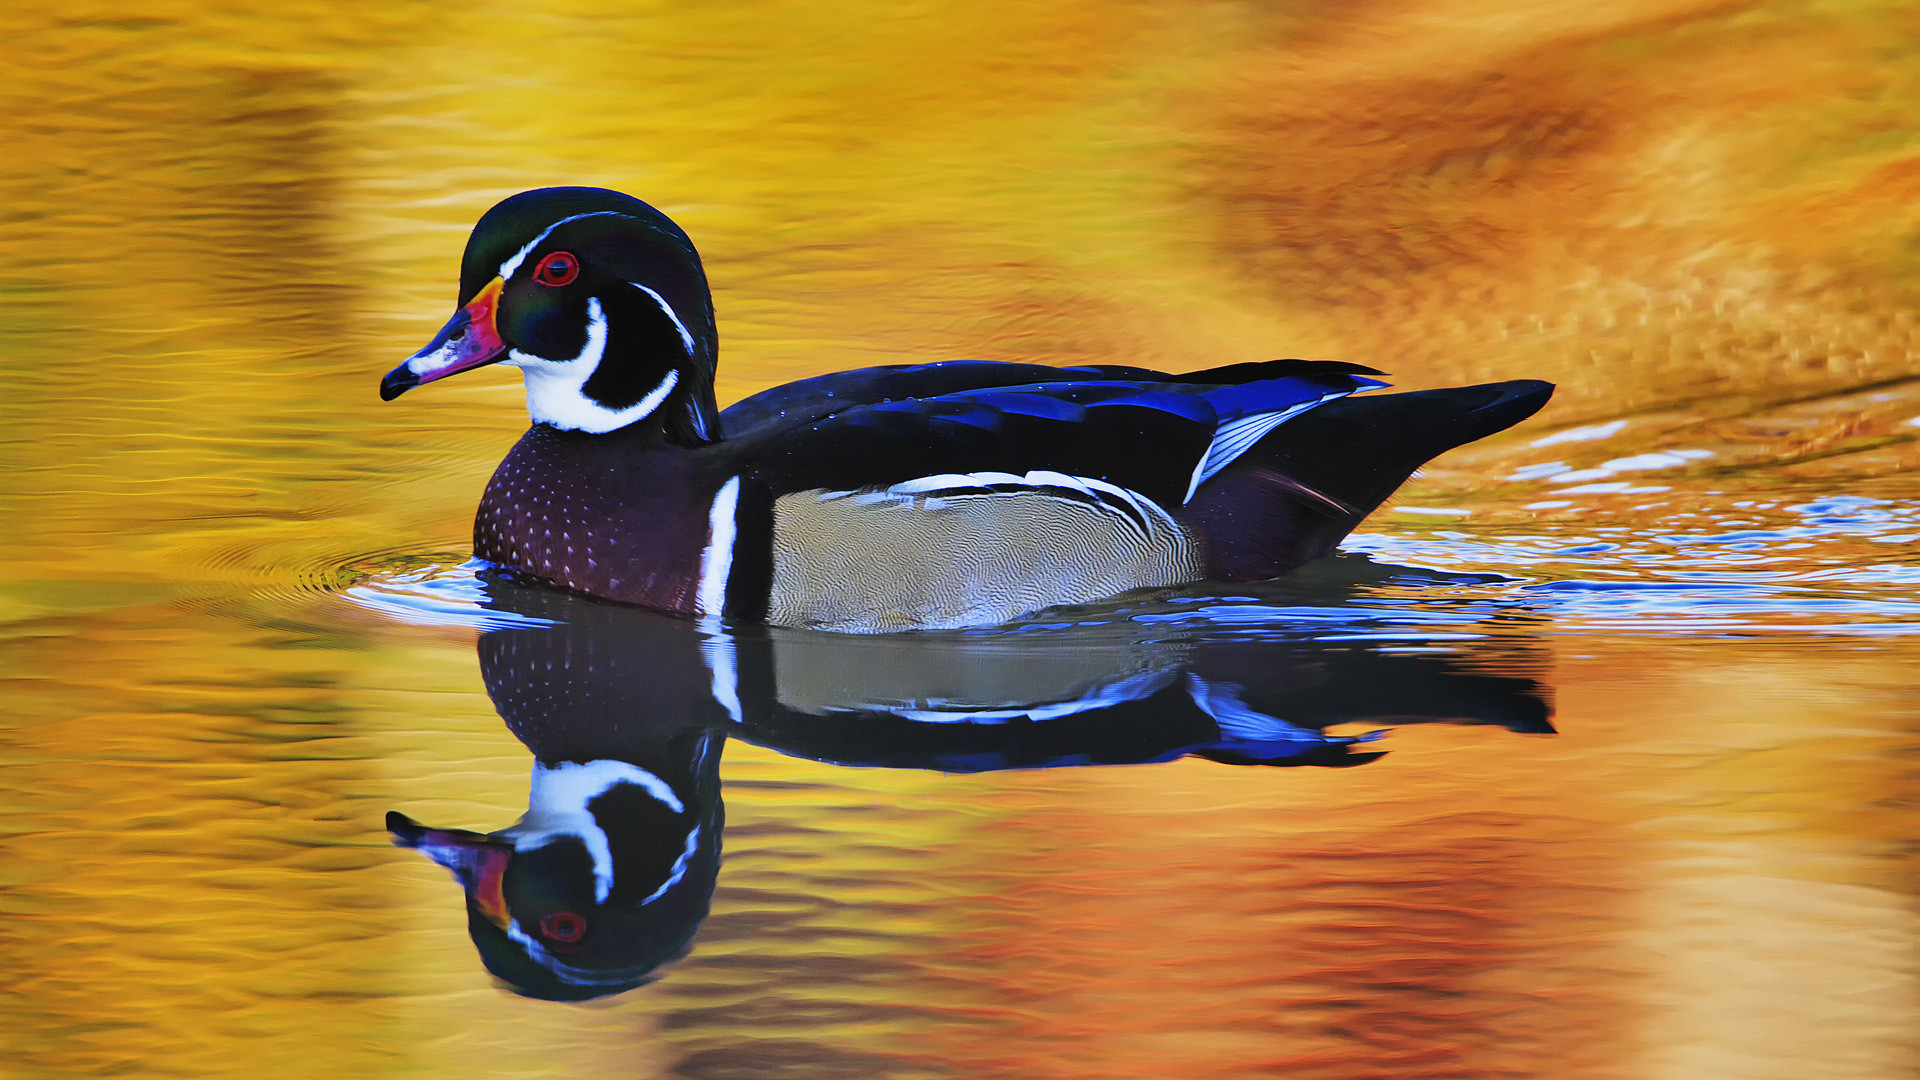 1920x1080 To Download or Set this Free Duck In Water Wallpaper as the Desktop  Background Image for